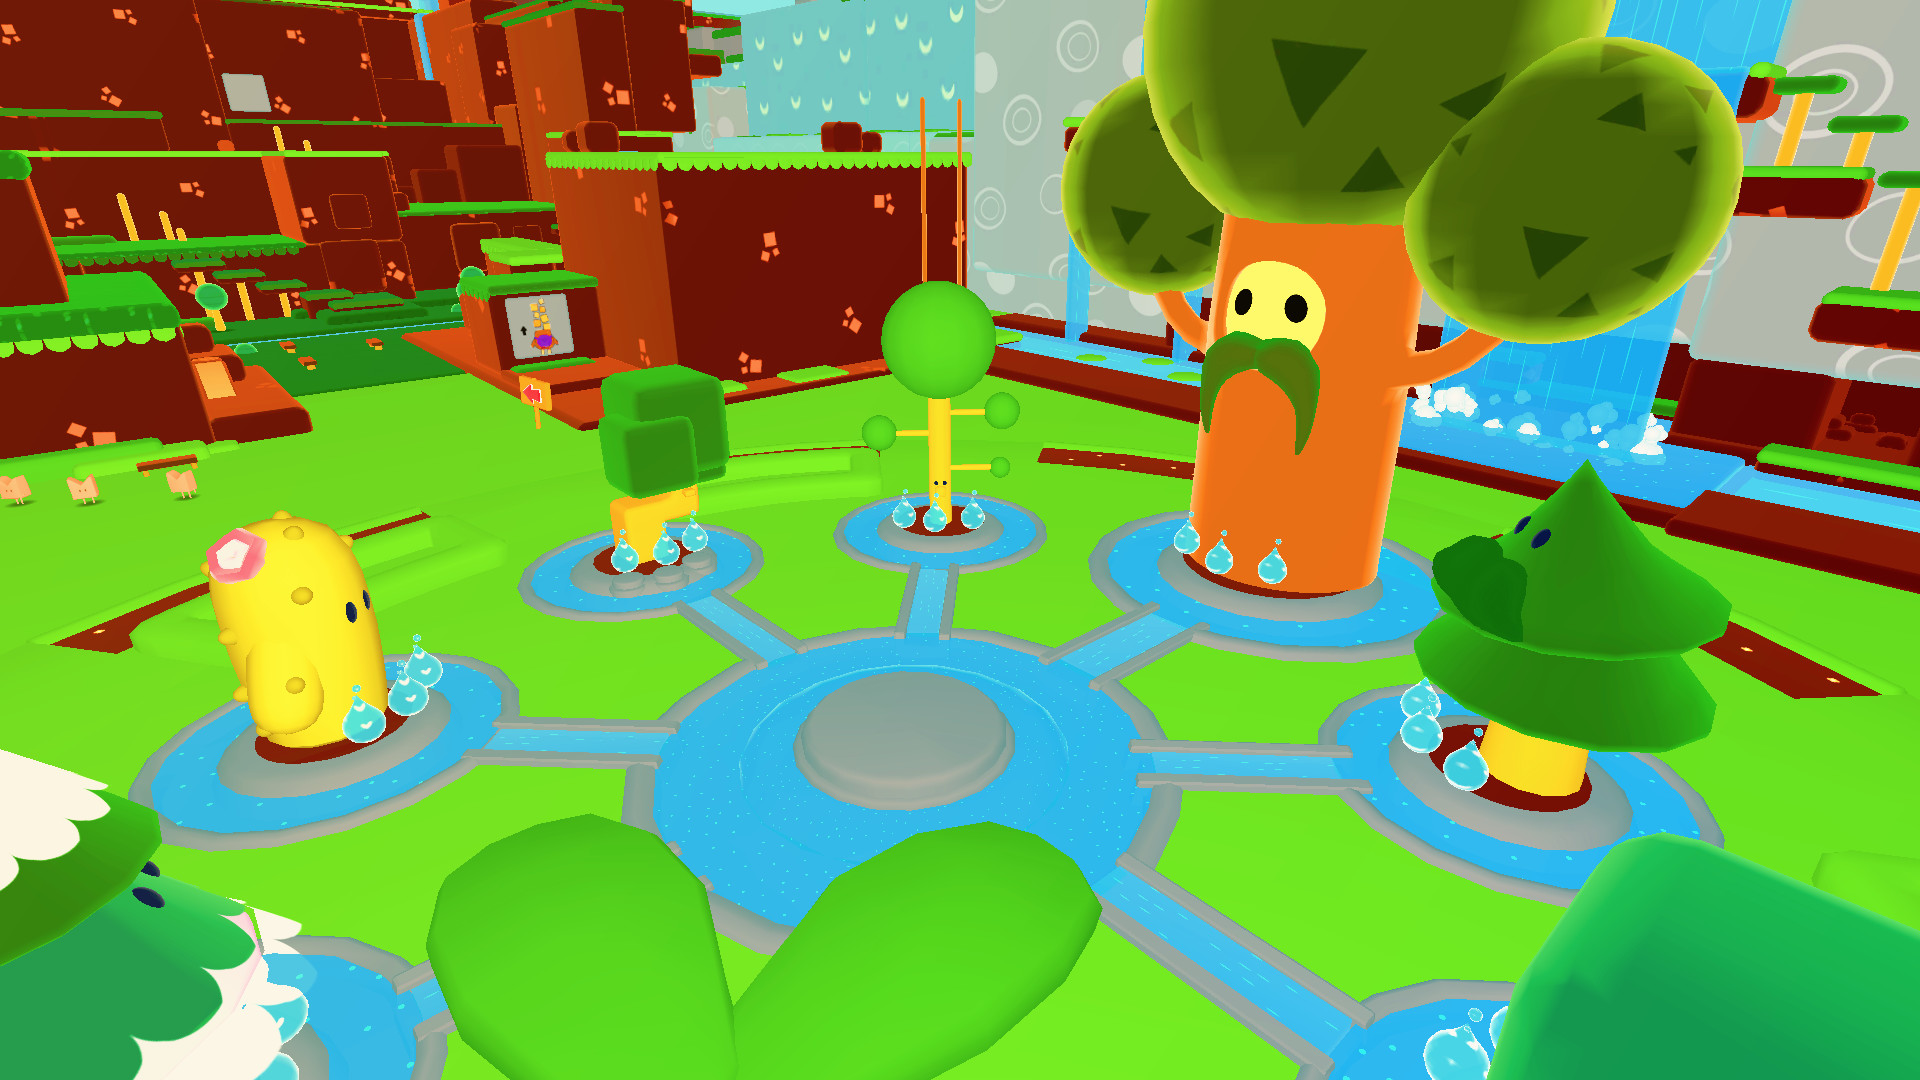 Woodle Tree 2: Deluxe+ Soundtrack Featured Screenshot #1